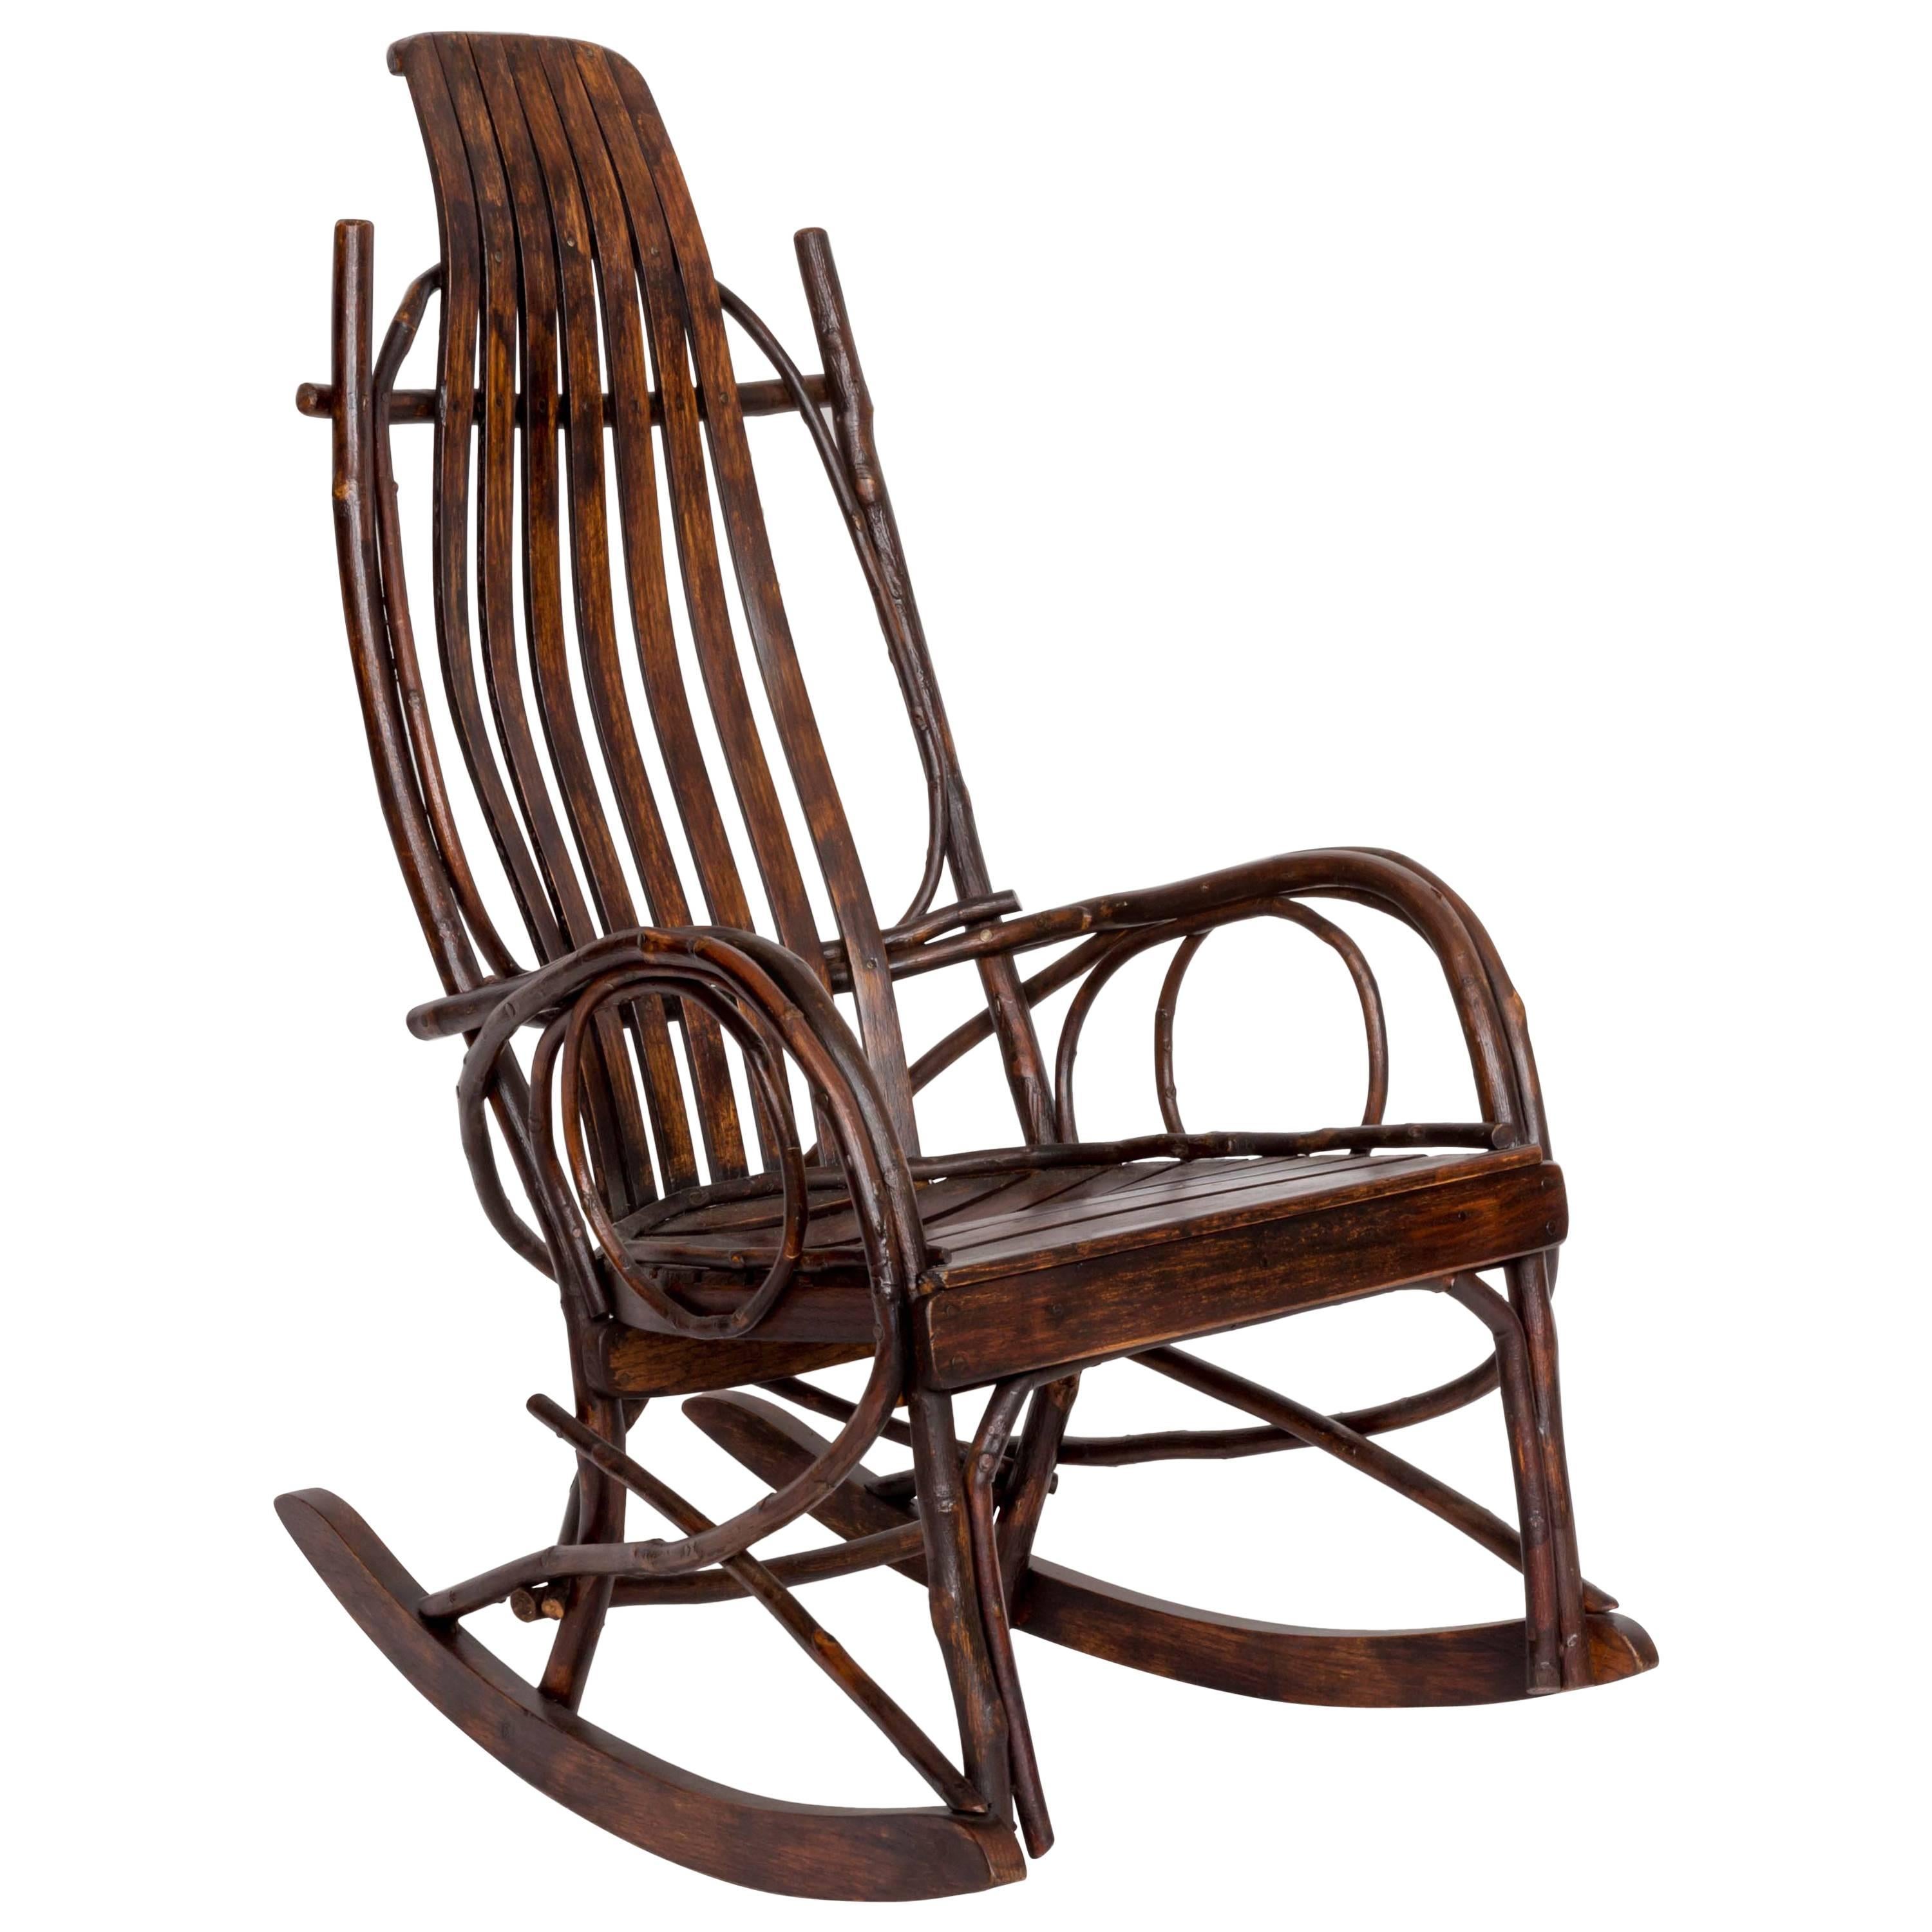 Early 20th-Century Adirondack Childs Rocker For Sale